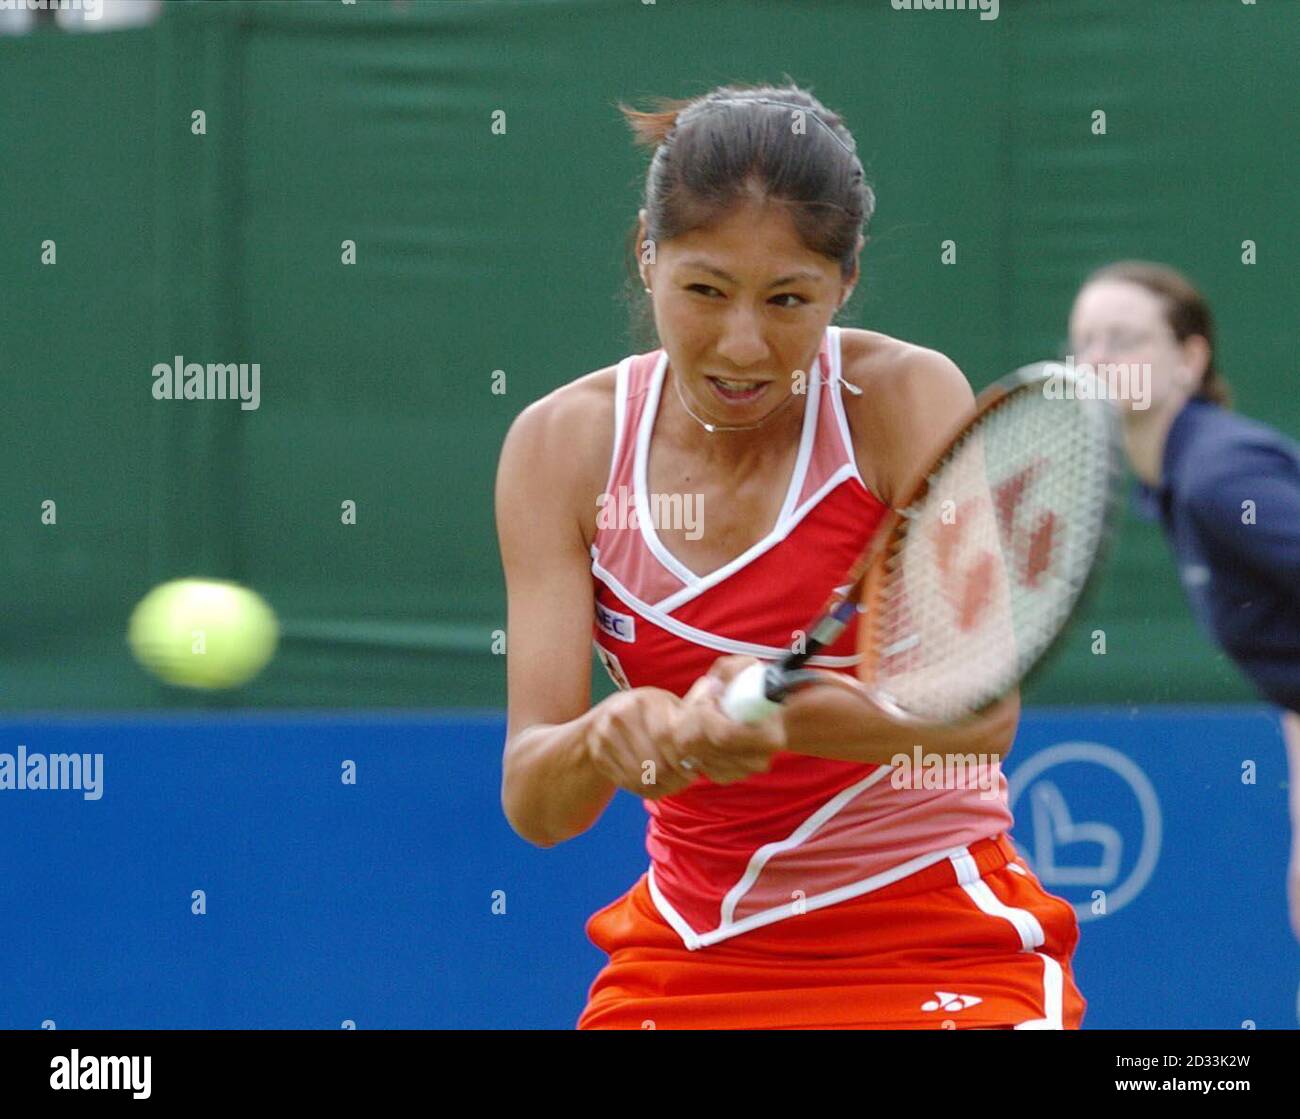 Japan's Shinobu Asagoe returns a serve from no.1 seed Russia's Nadia Petrova during their match at the DFS Classic in Edgbaston, Birmingham. Stock Photo